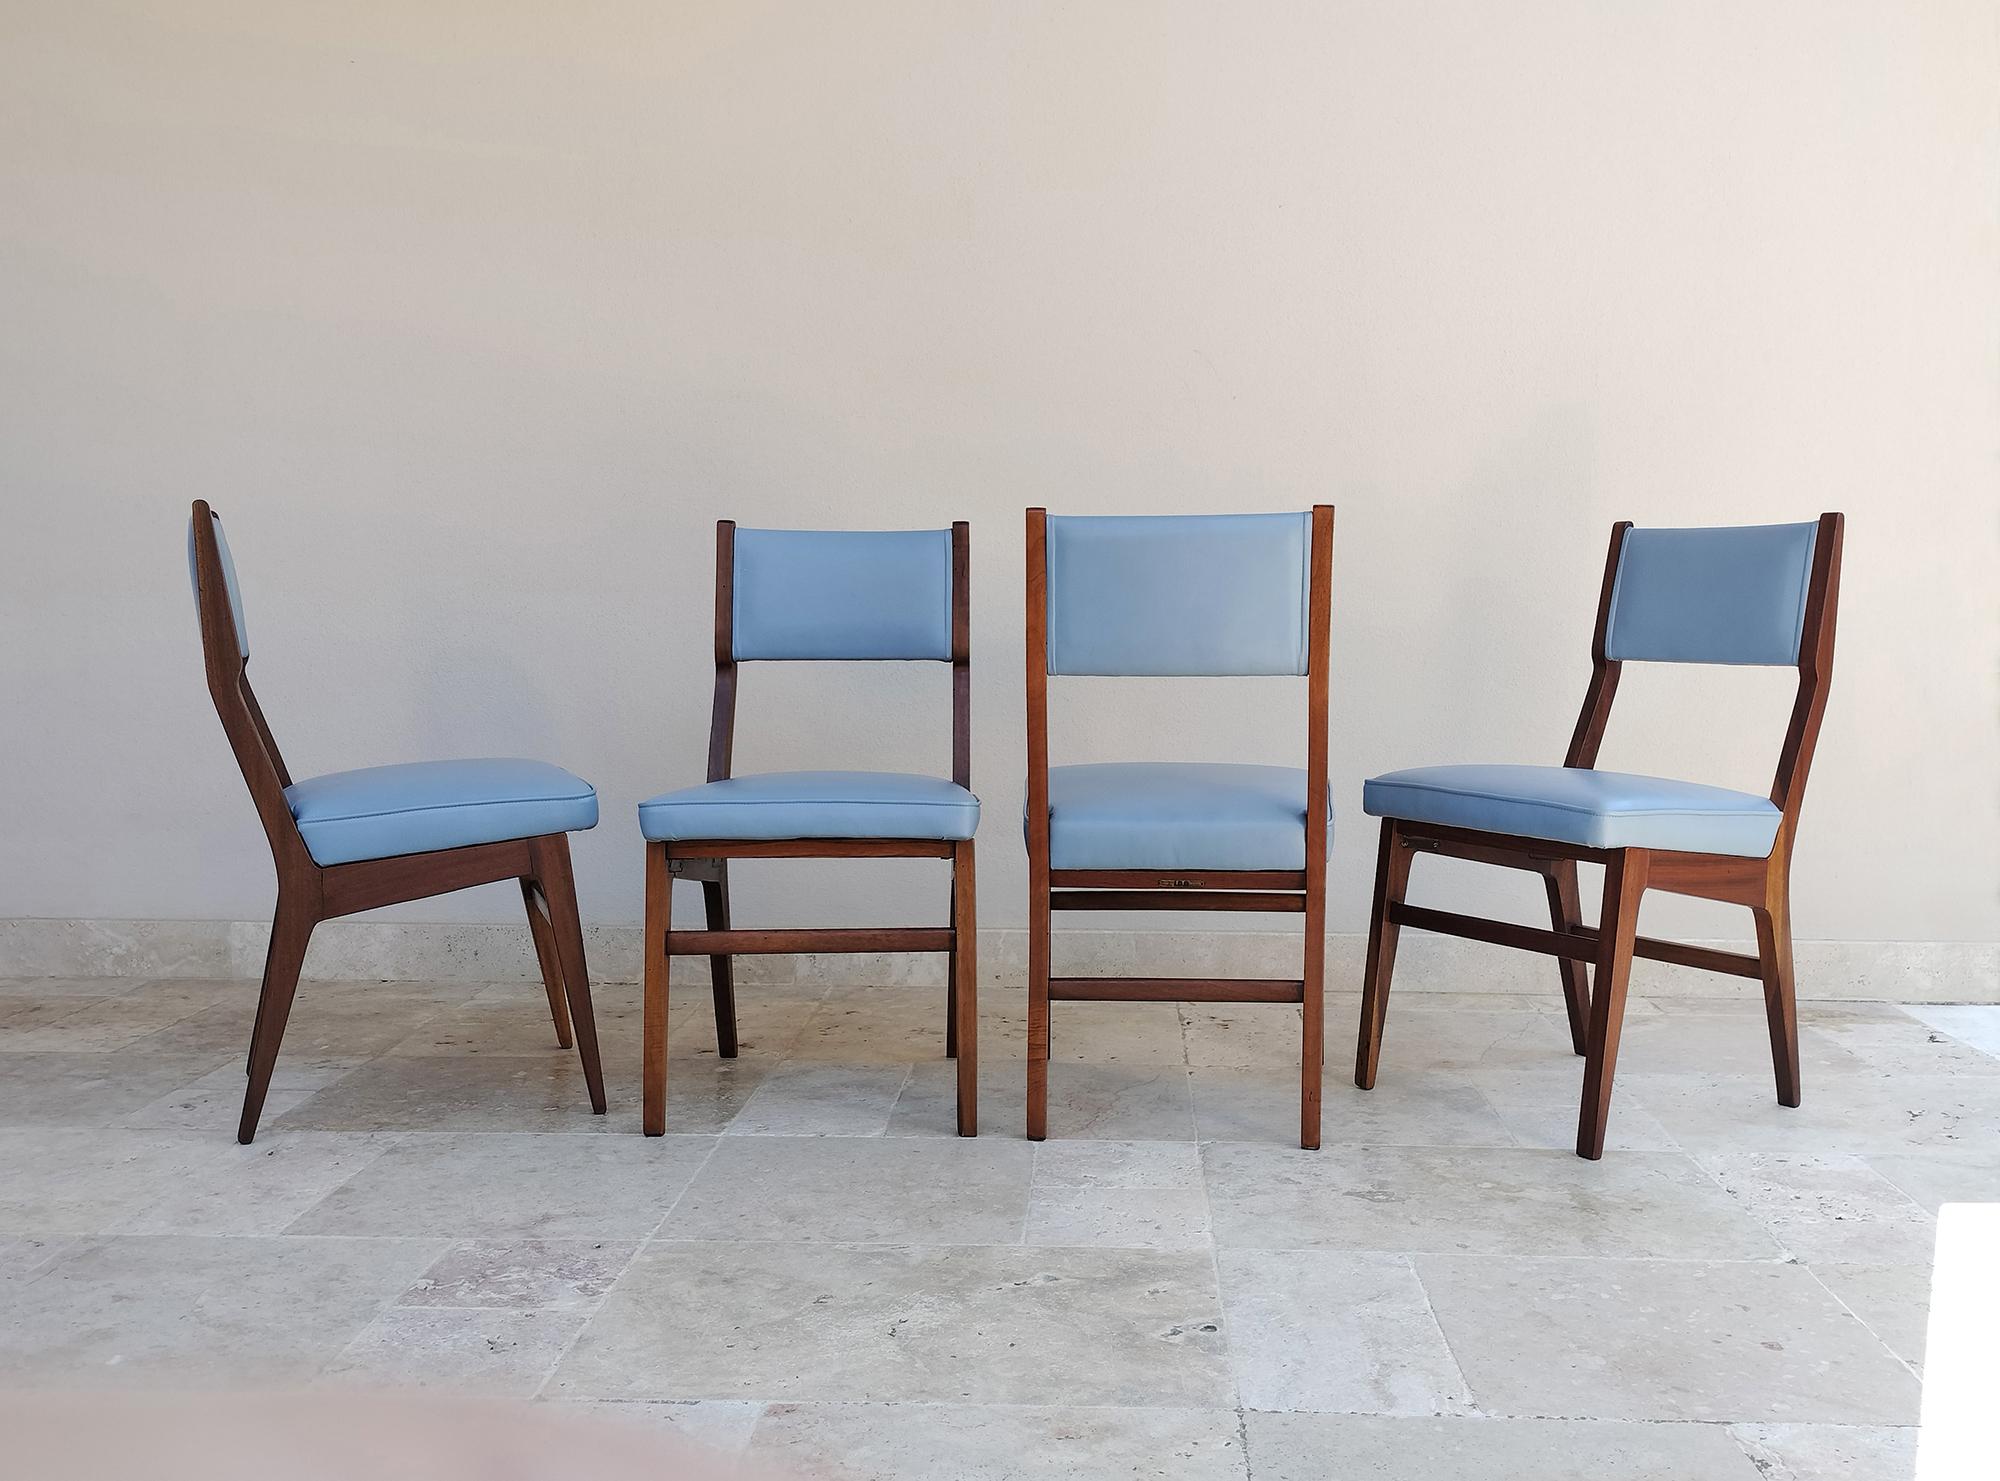 Italian Set of Five I.S.A. Bergamo Chairs Attributed to Gio Ponti 1950s For Sale